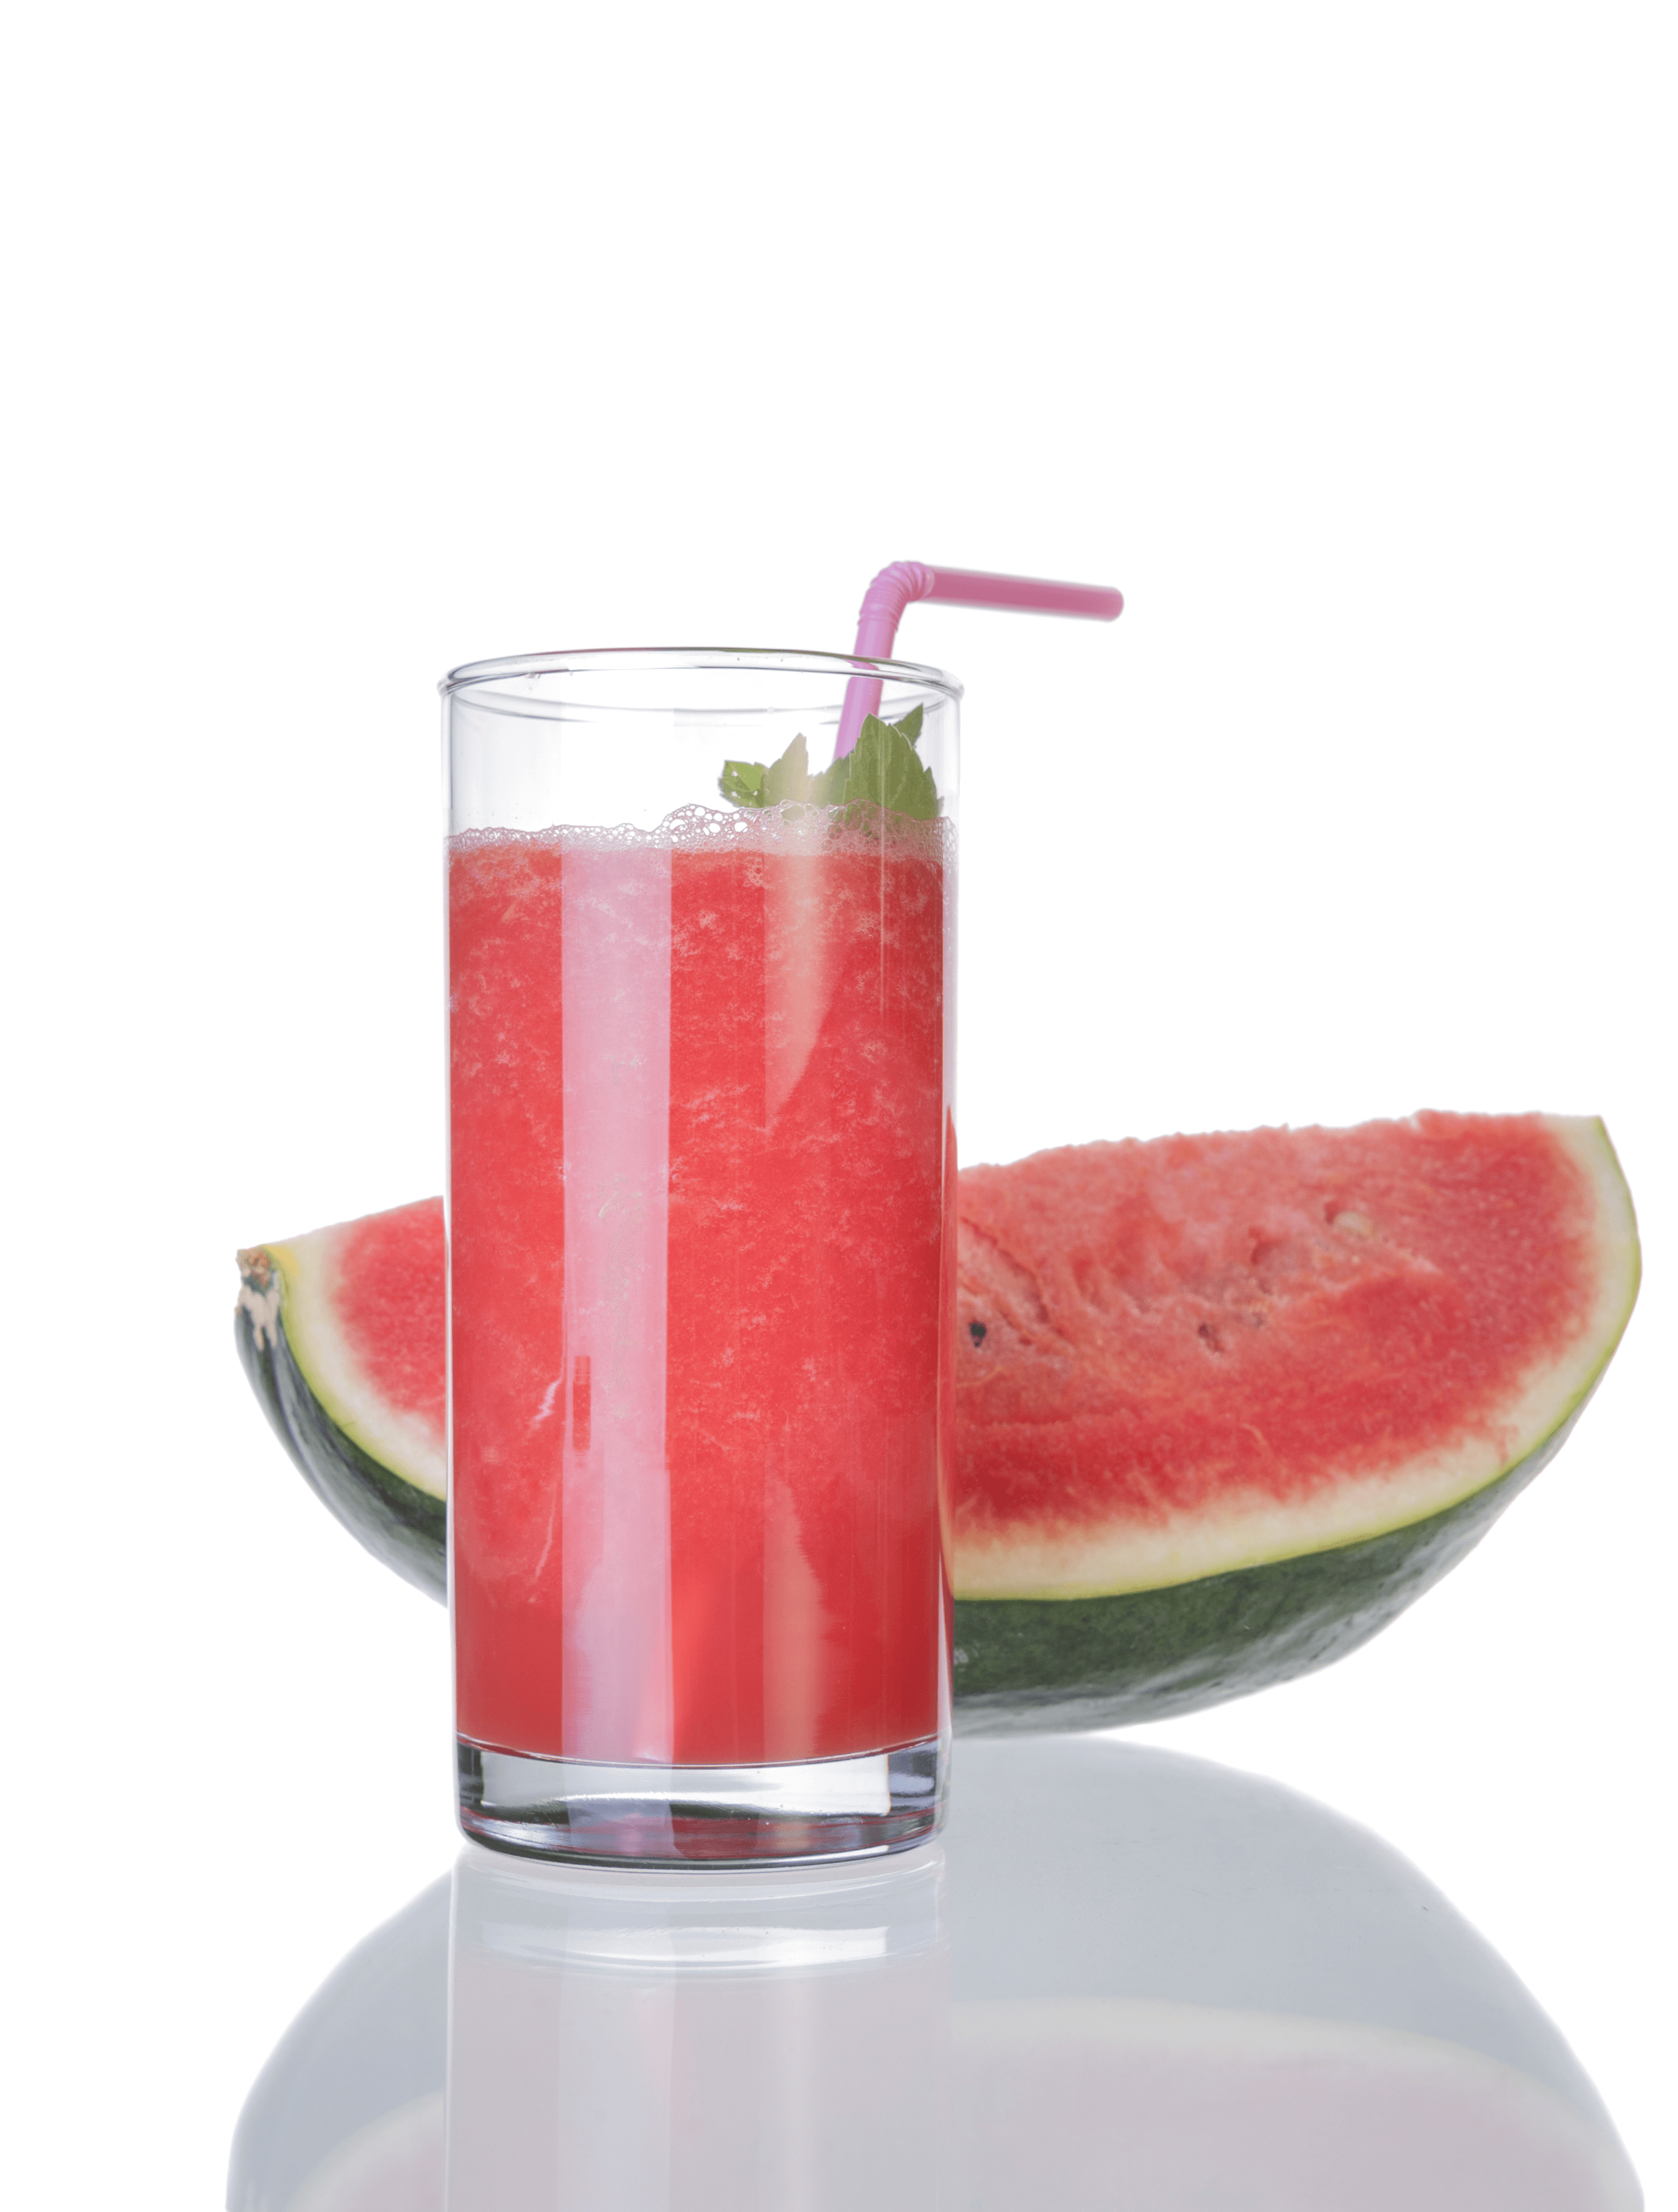 How To Make Fresh Watermelon Juice At Home Recipe Typical Of Langsa City